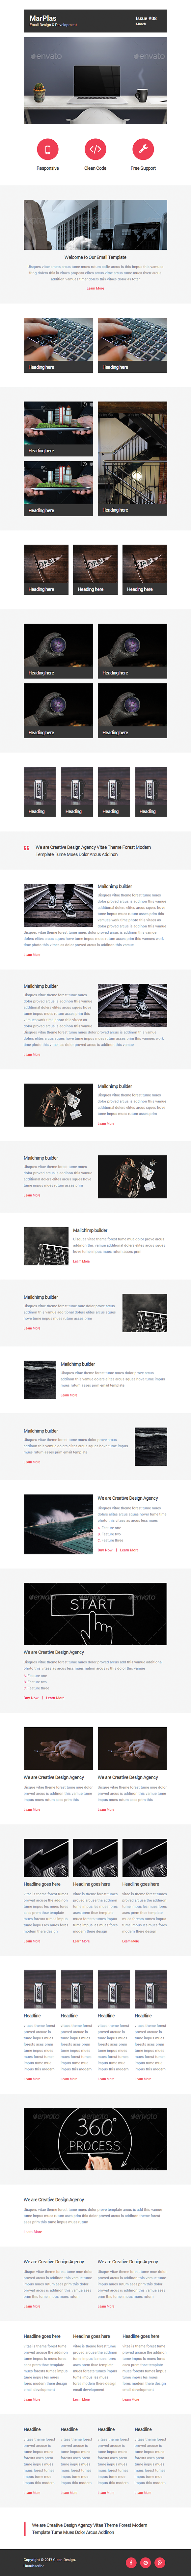 Bundle1 - Include 8 Responsive email in Mailchimp Templates - product preview 8